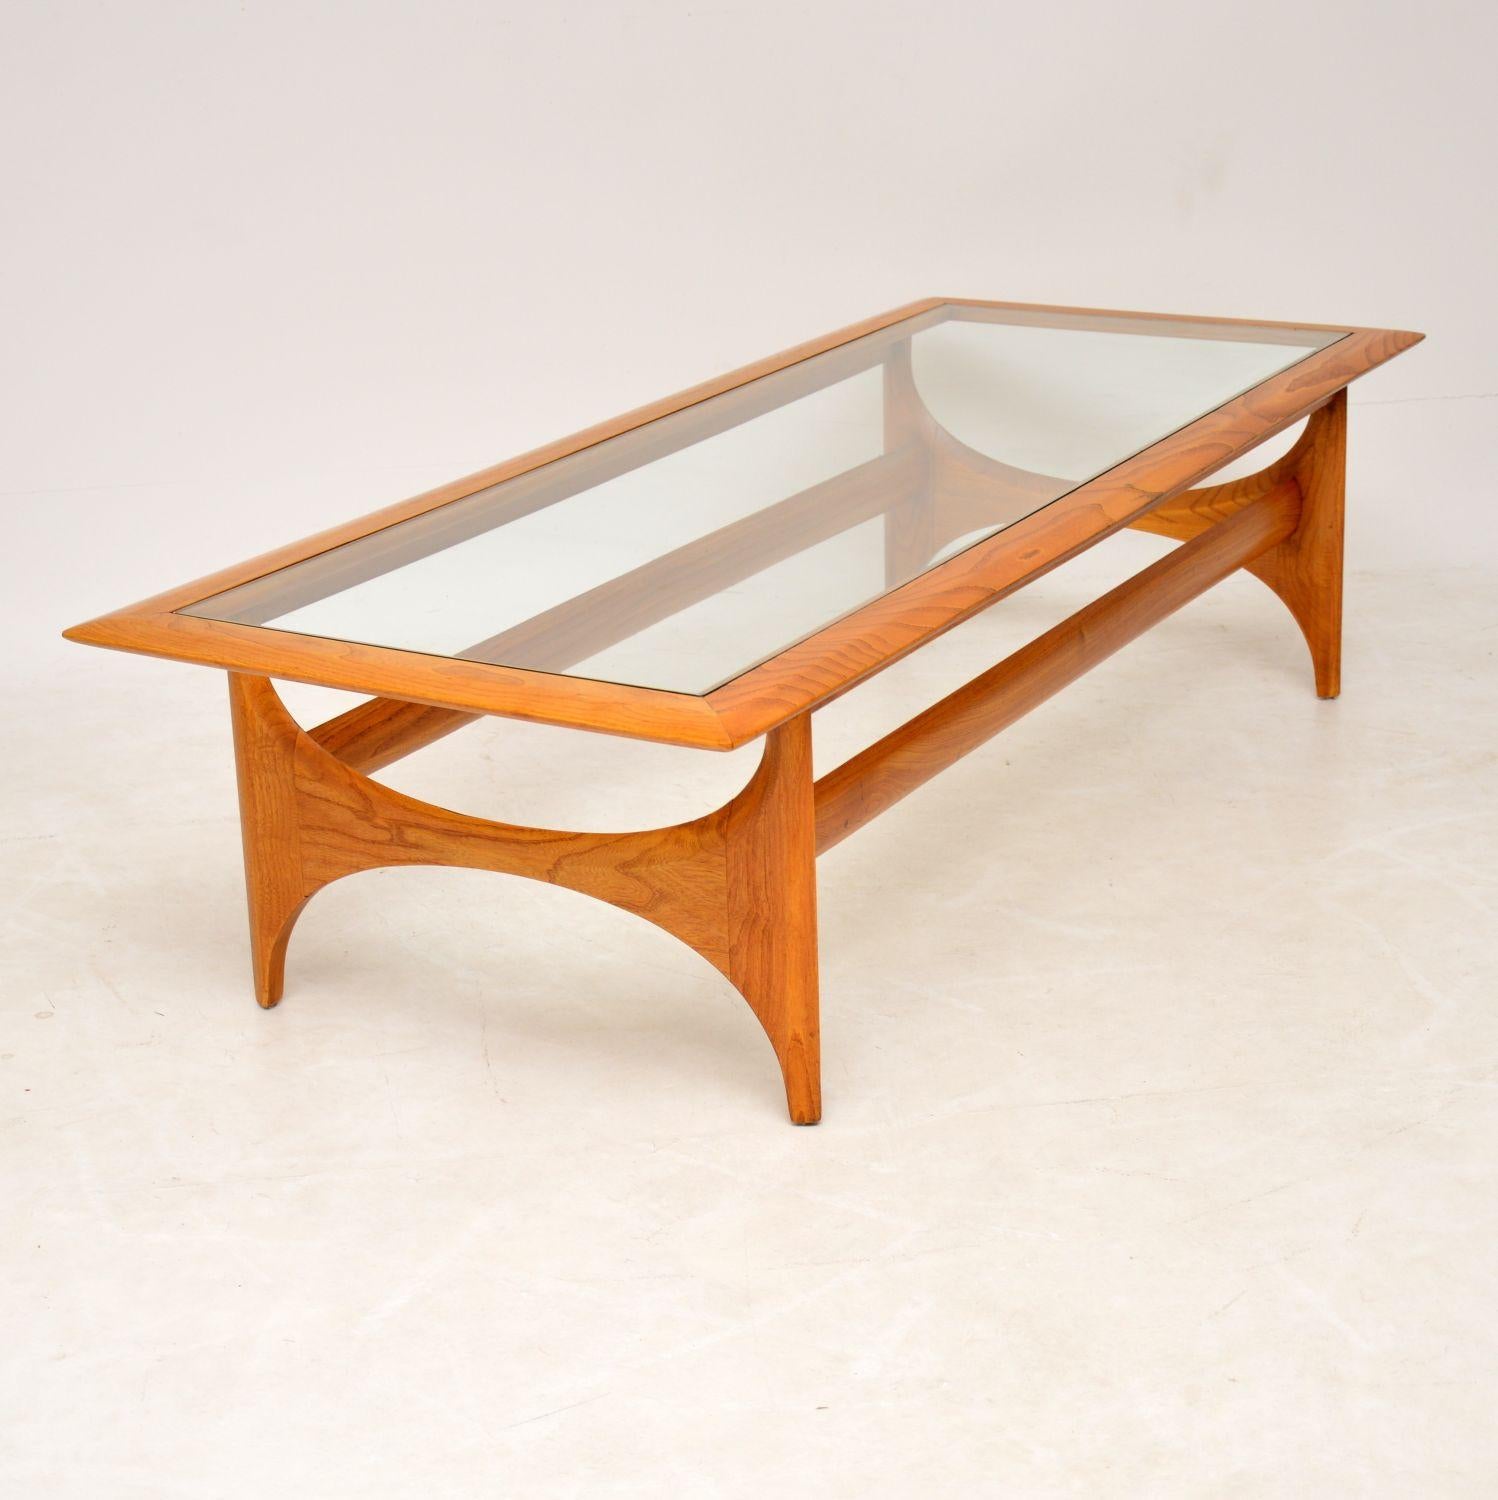 A beautiful and very rare coffee table in elmwood, this was made in the USA by Lane Altavista, it dates from the 1960s. It has a stunning design and is of amazing quality, this is also a great size. The condition is superb, we have had the frame